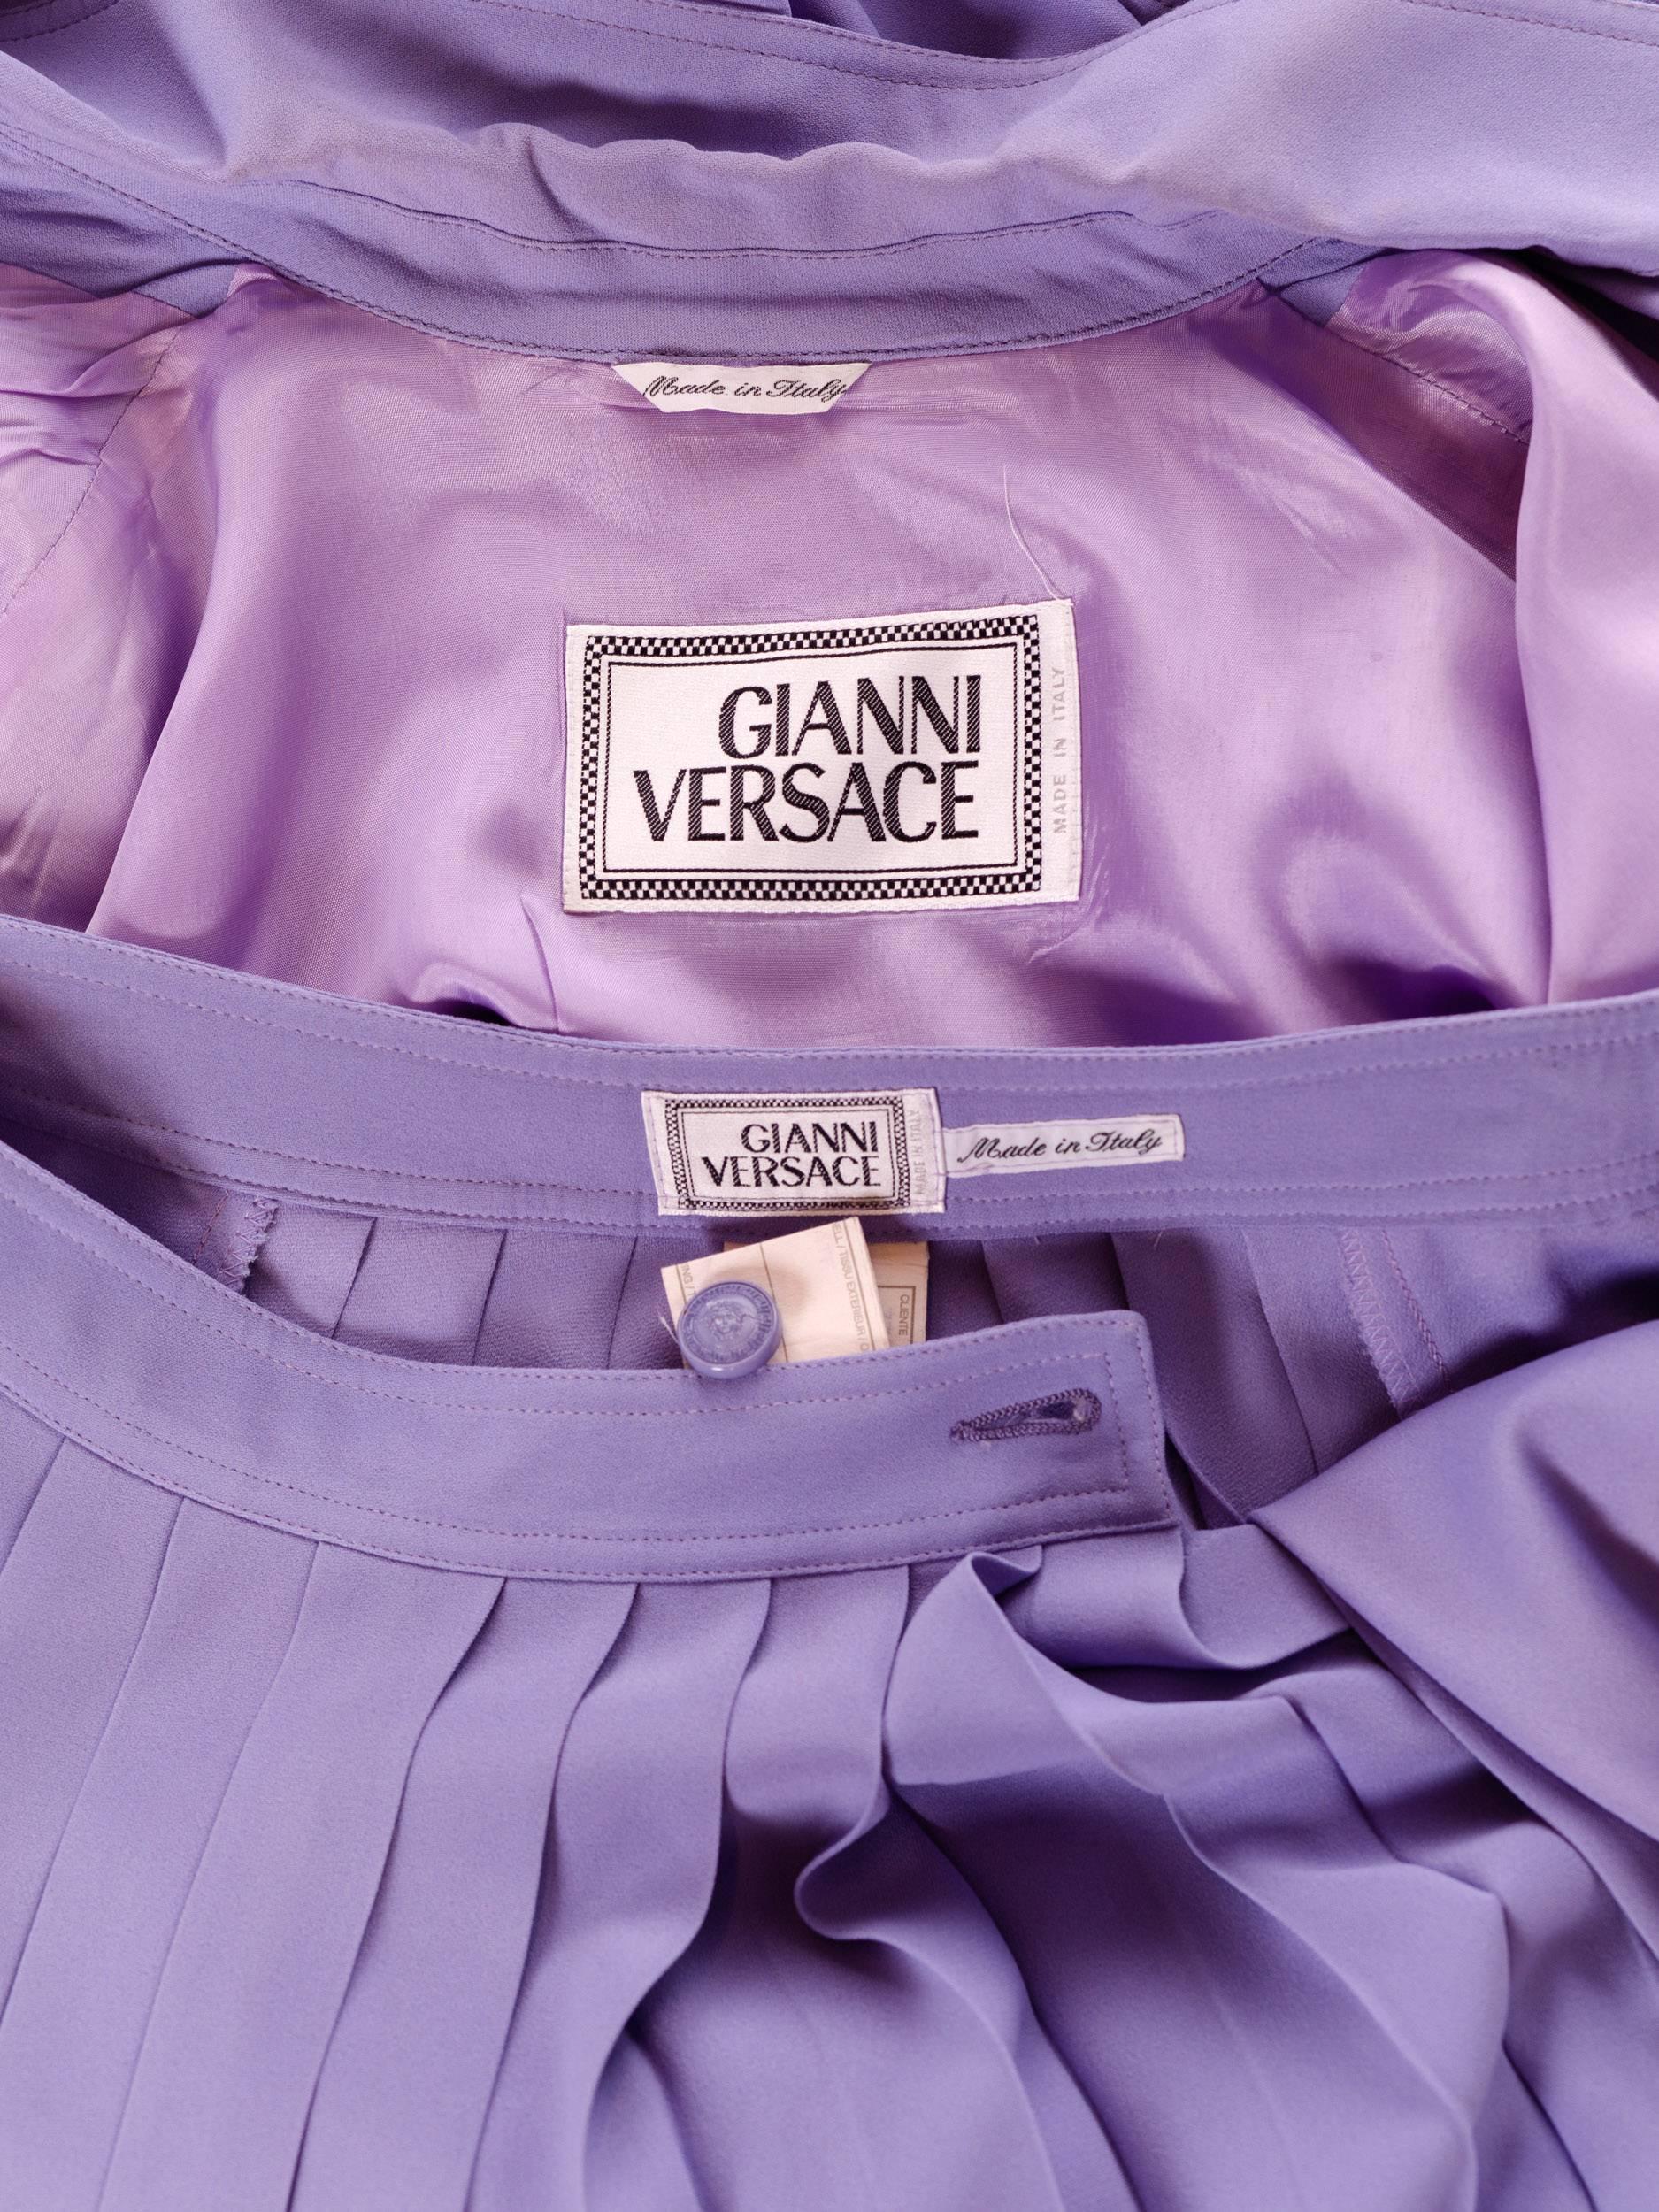 1990S GIANNI VERSACE Lilac Rayon Blend Crepe Safety Pin Suit Skirt 6